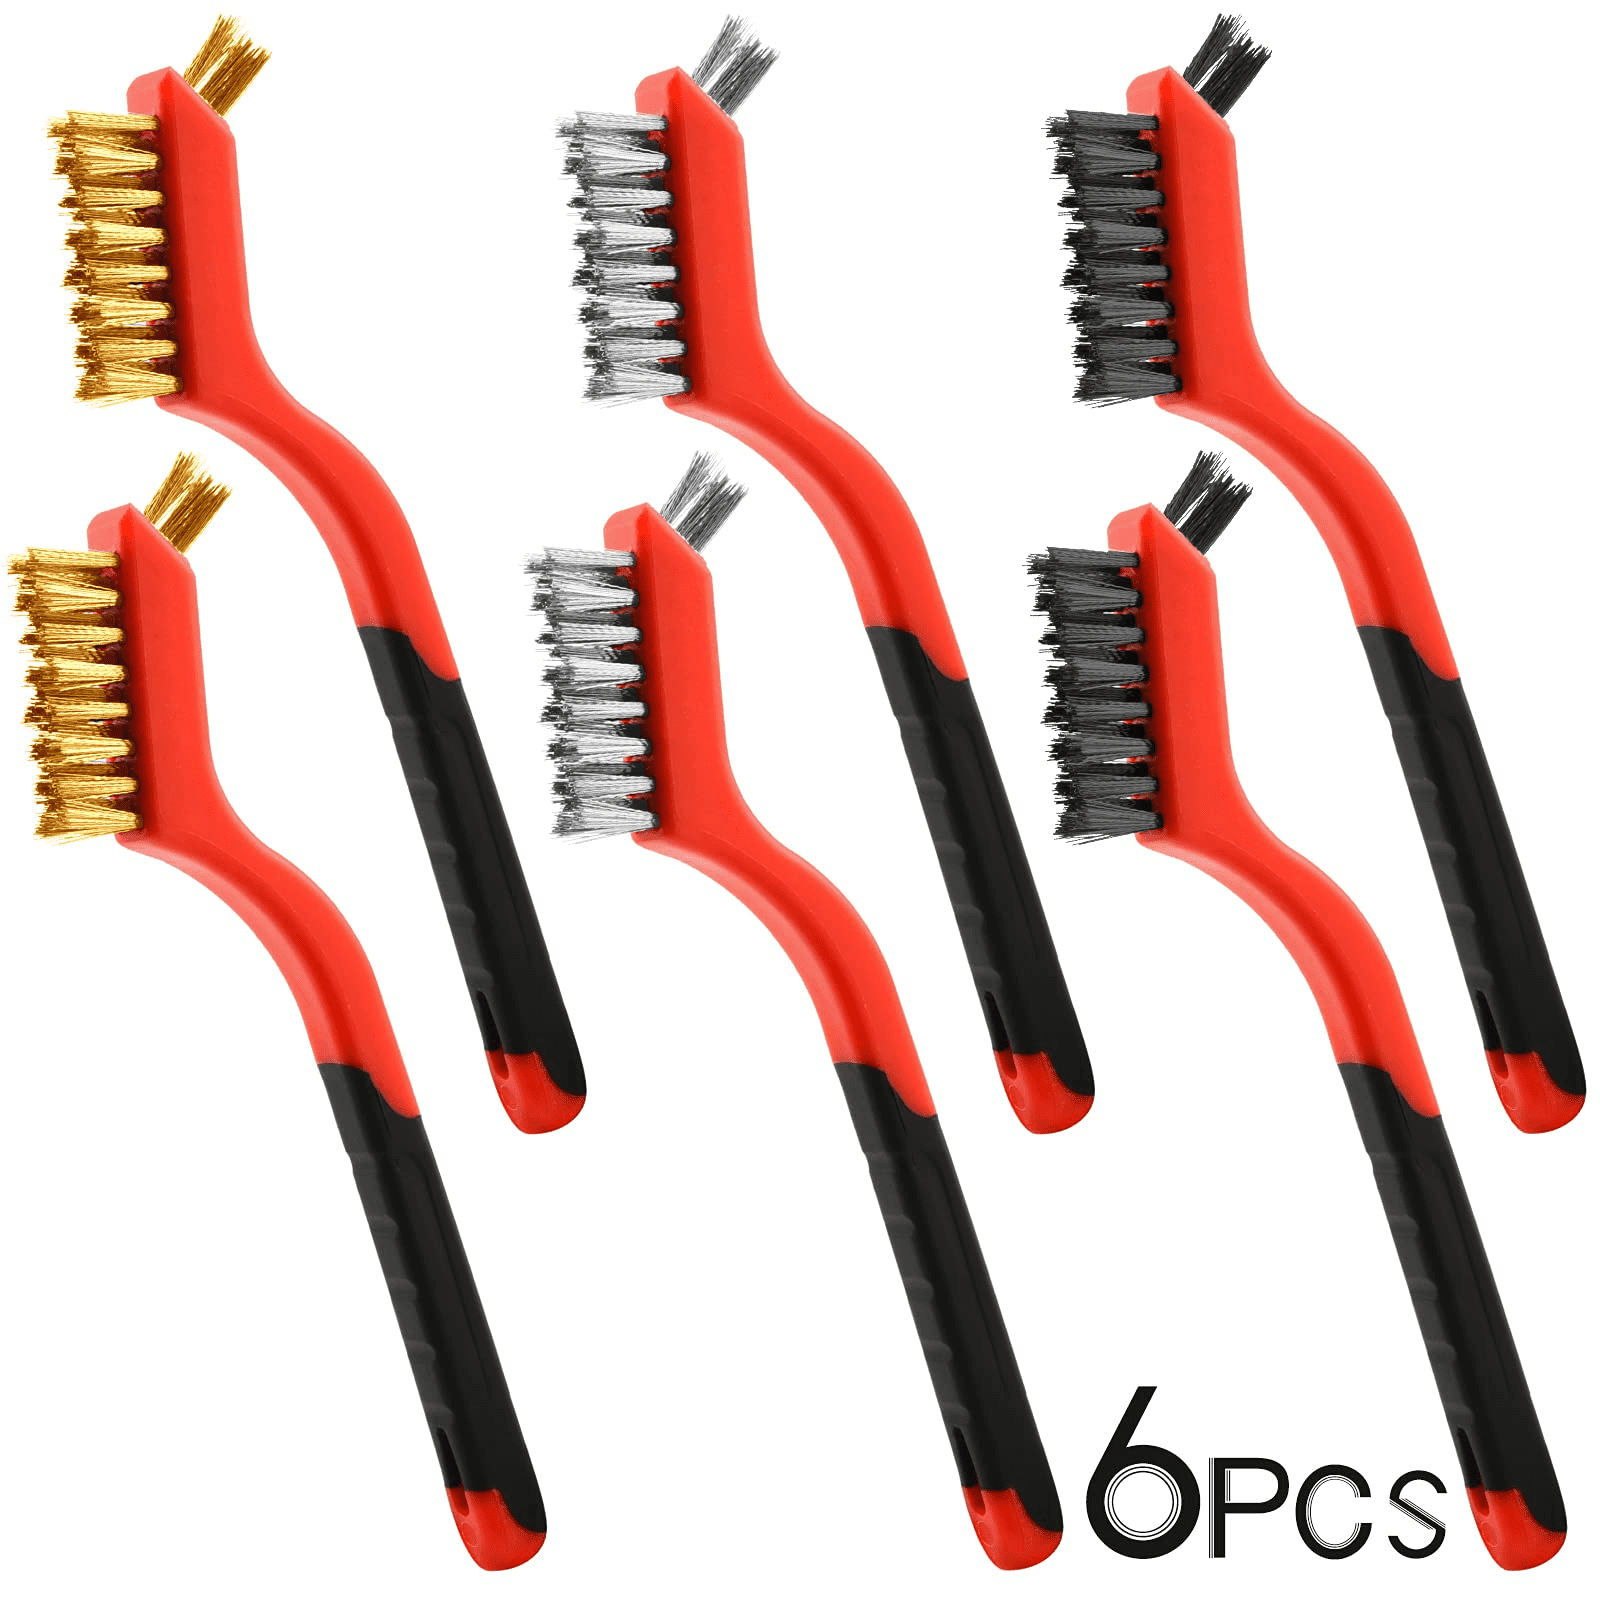 20pc Industrial Wire Brush Set Extra Long Reach Cleaning & Decarbon Brush Kit 